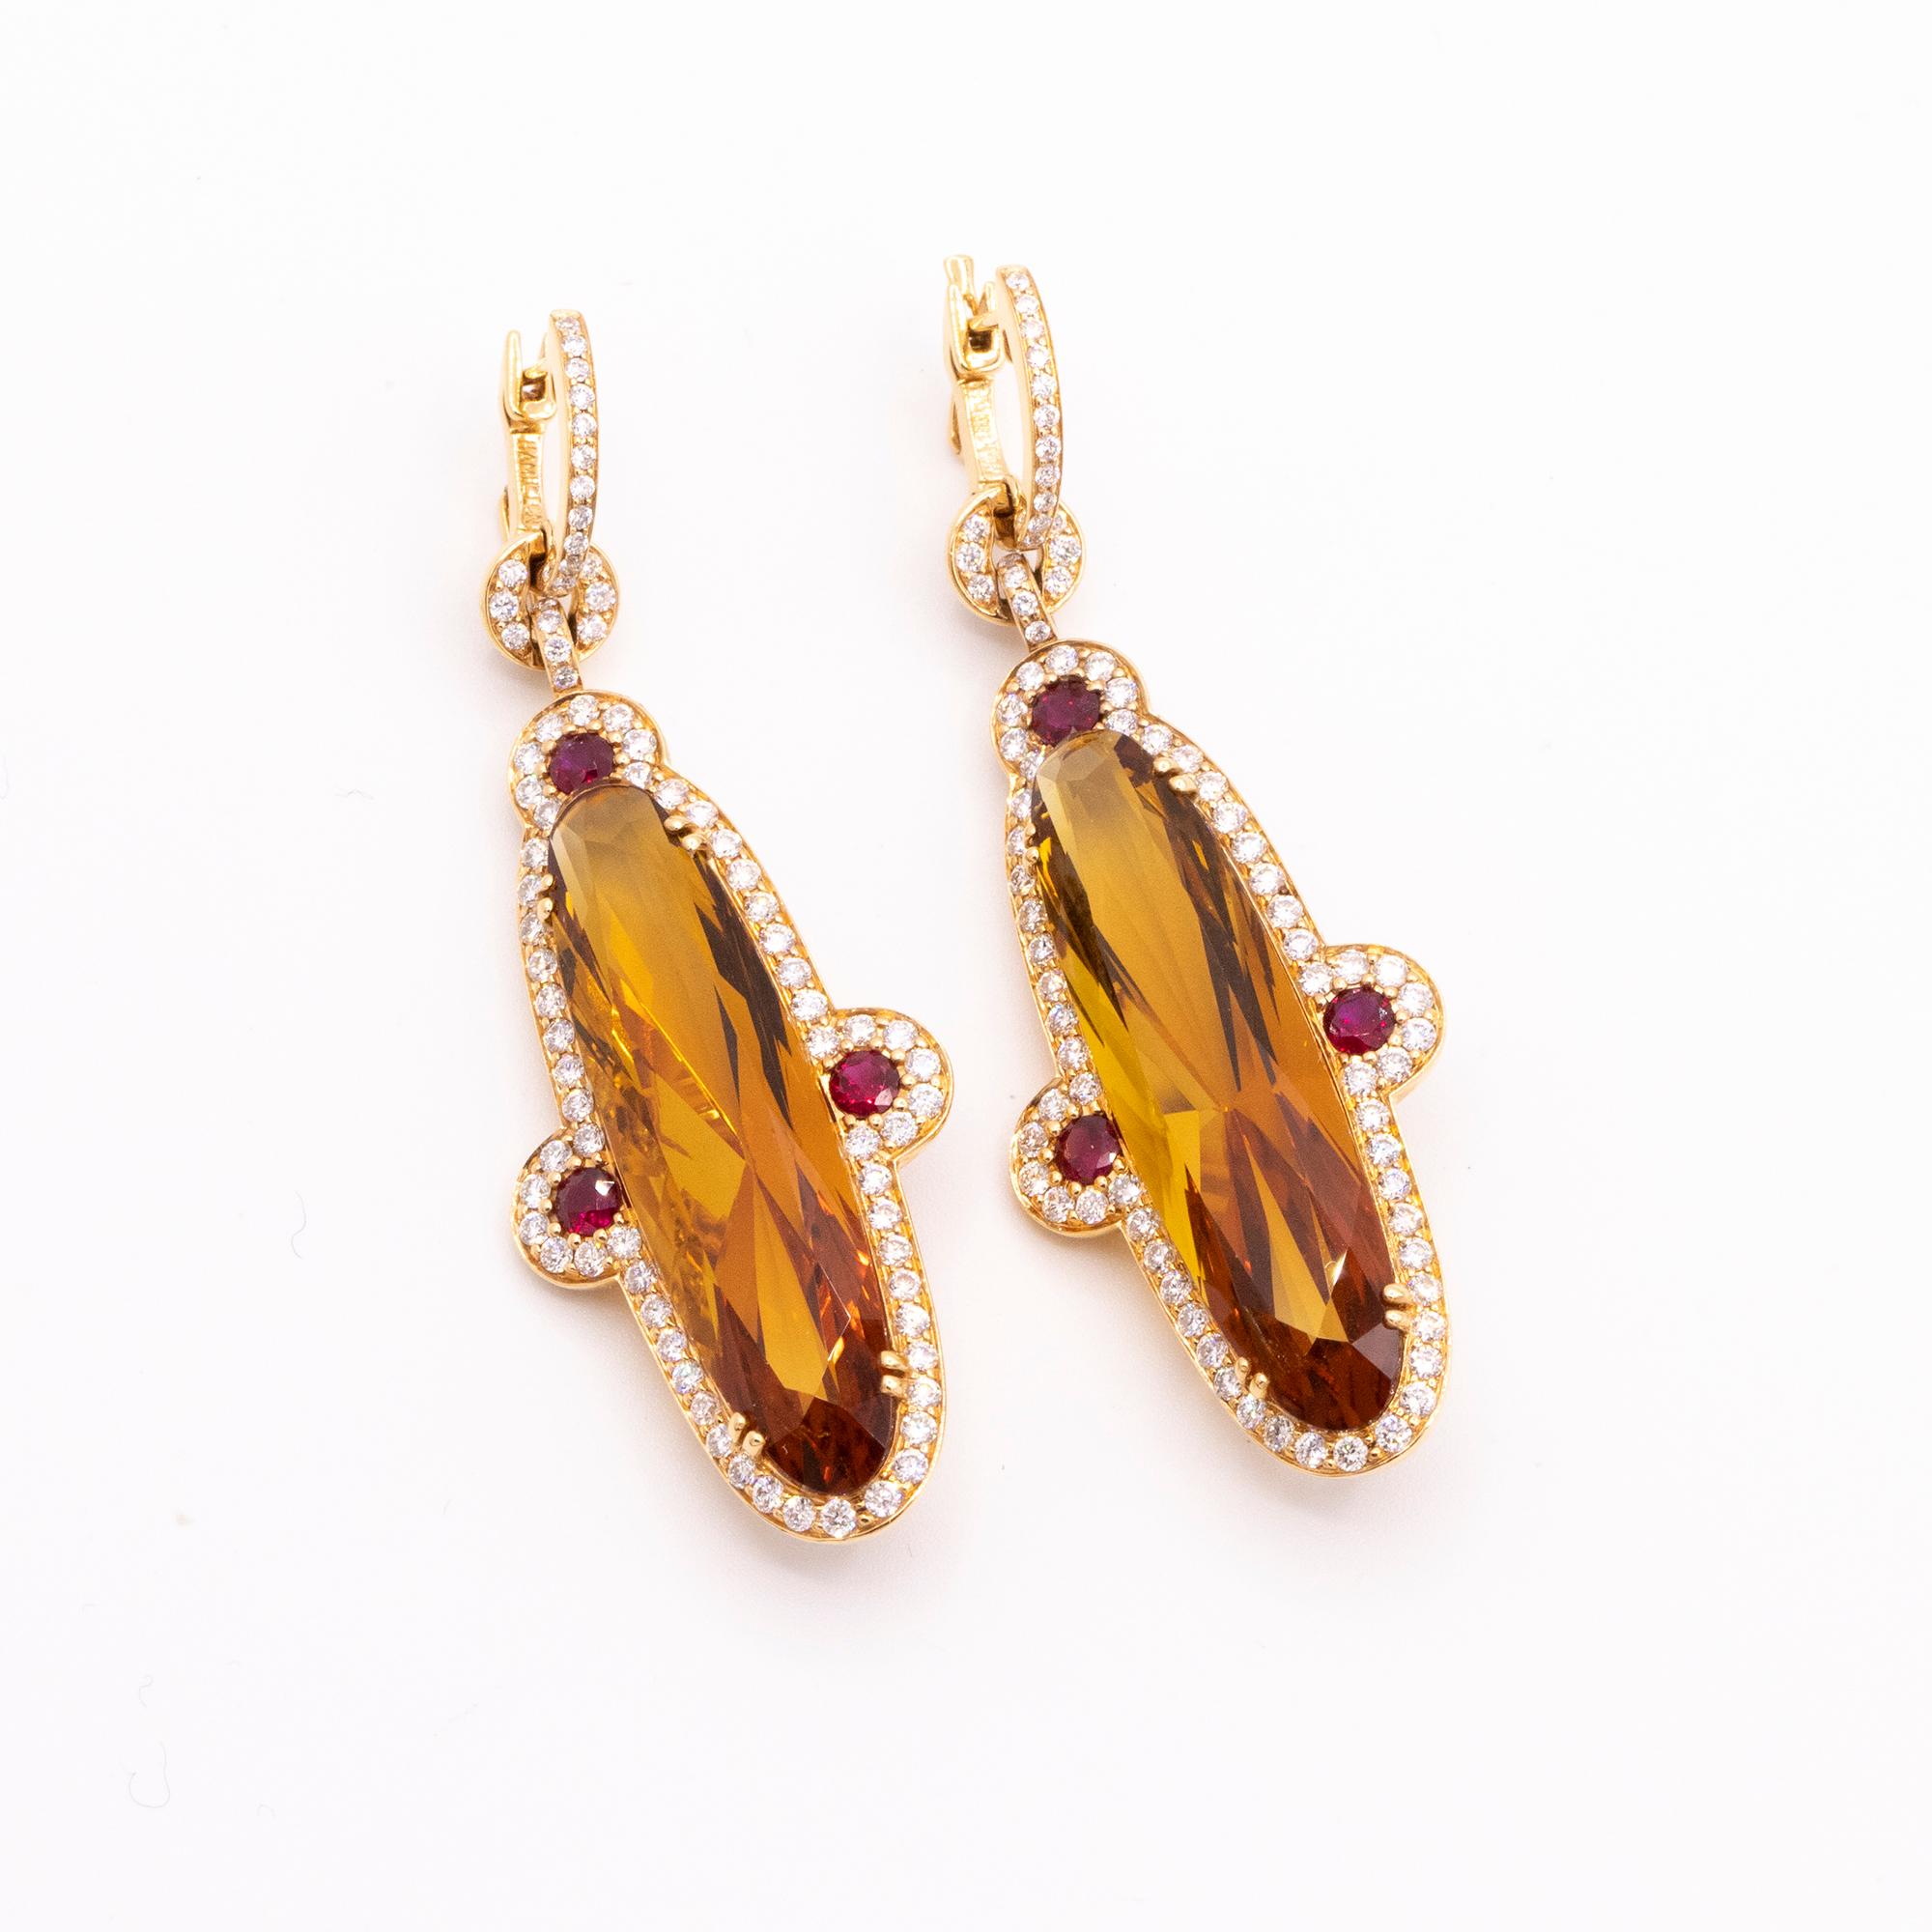 From Hamilton's Gemstone Collection, handmade drop earrings set in 18k white gold with orange citrines, rubies and diamonds. The citrines weigh 26.84ctw, the 6 rubies weigh .74ctw and 160 round brilliant diamonds weigh 1.97ctw. 2 1/4